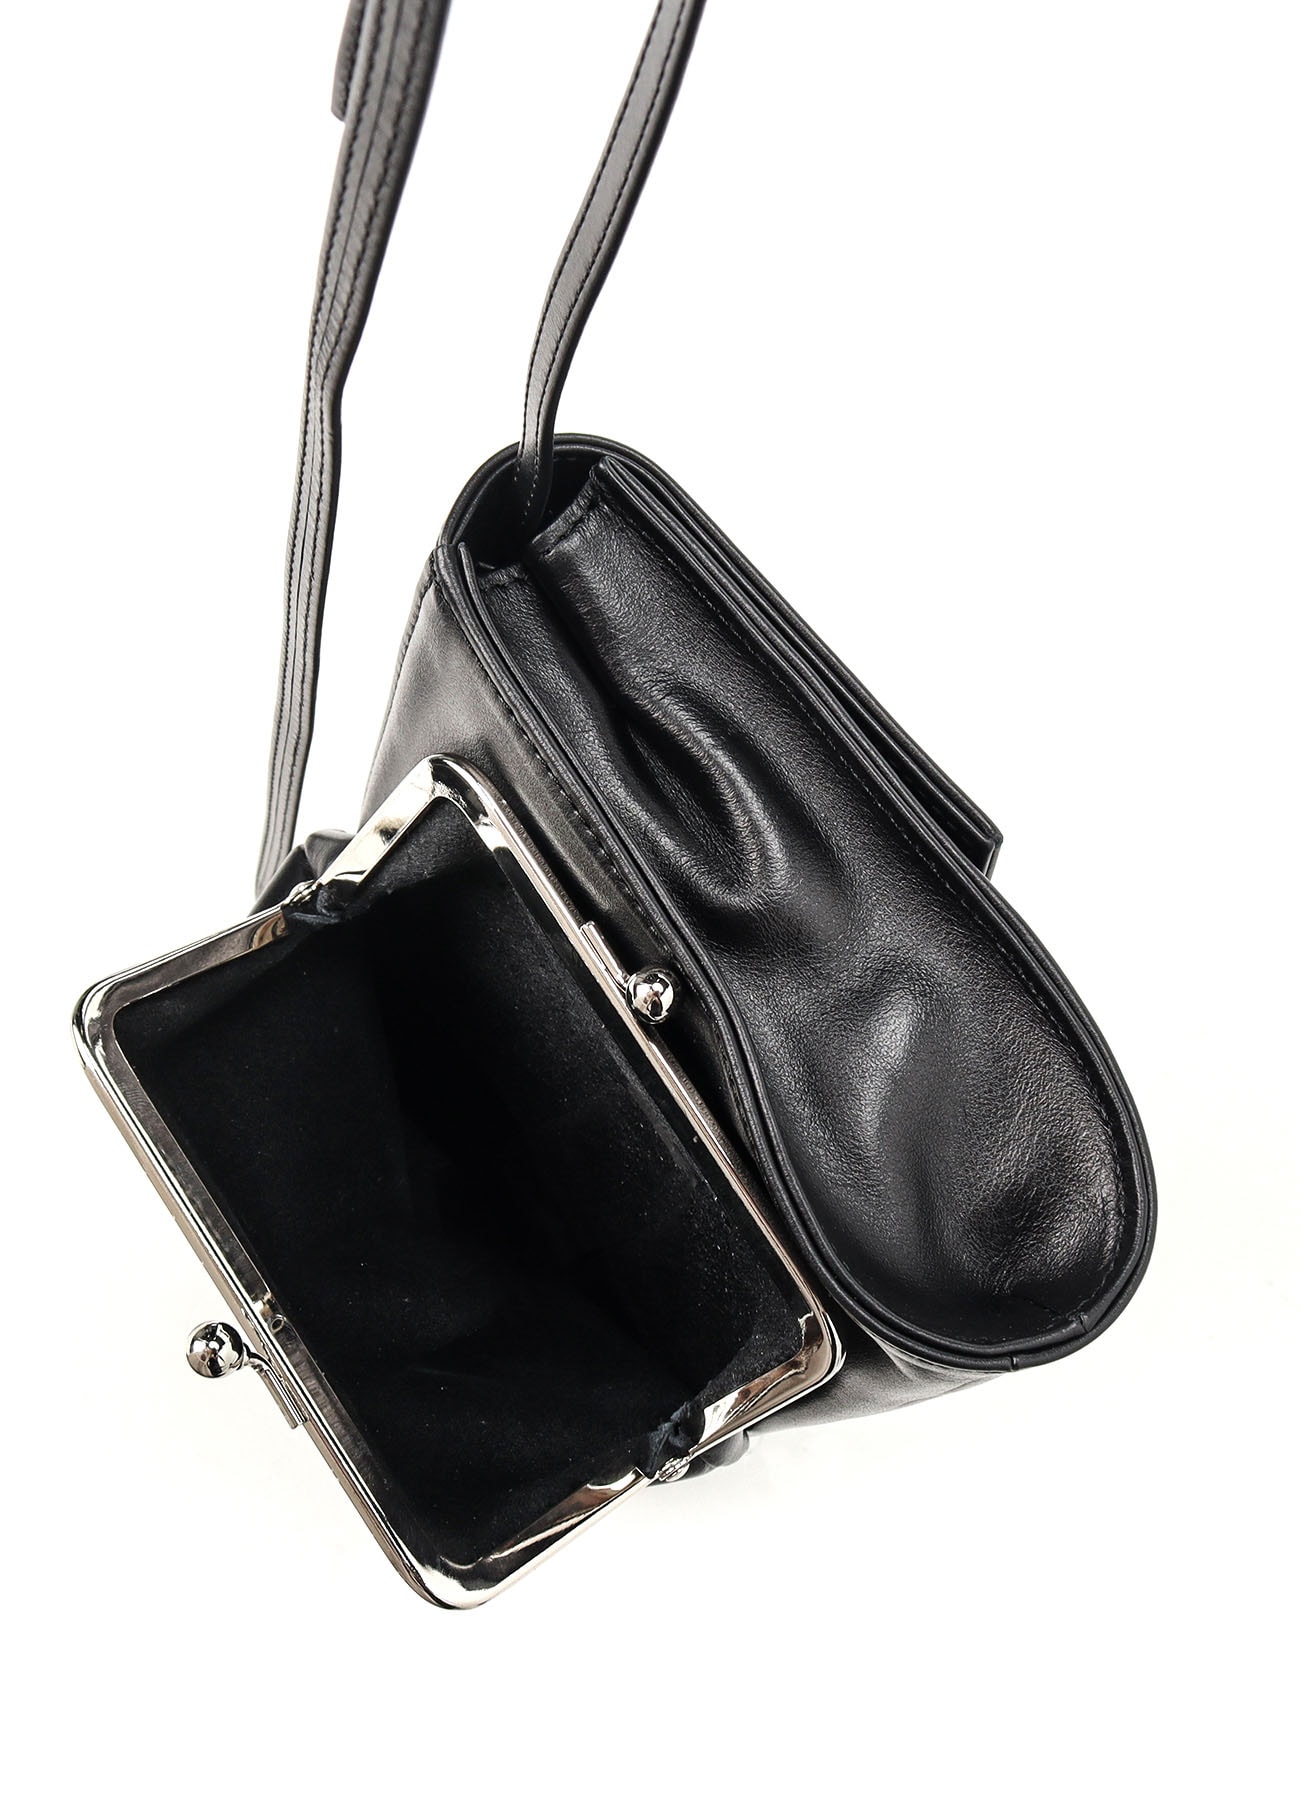 【8/7 12:00(JST) Release】COW LEATHER CLUTCH BAG WITH CLASP